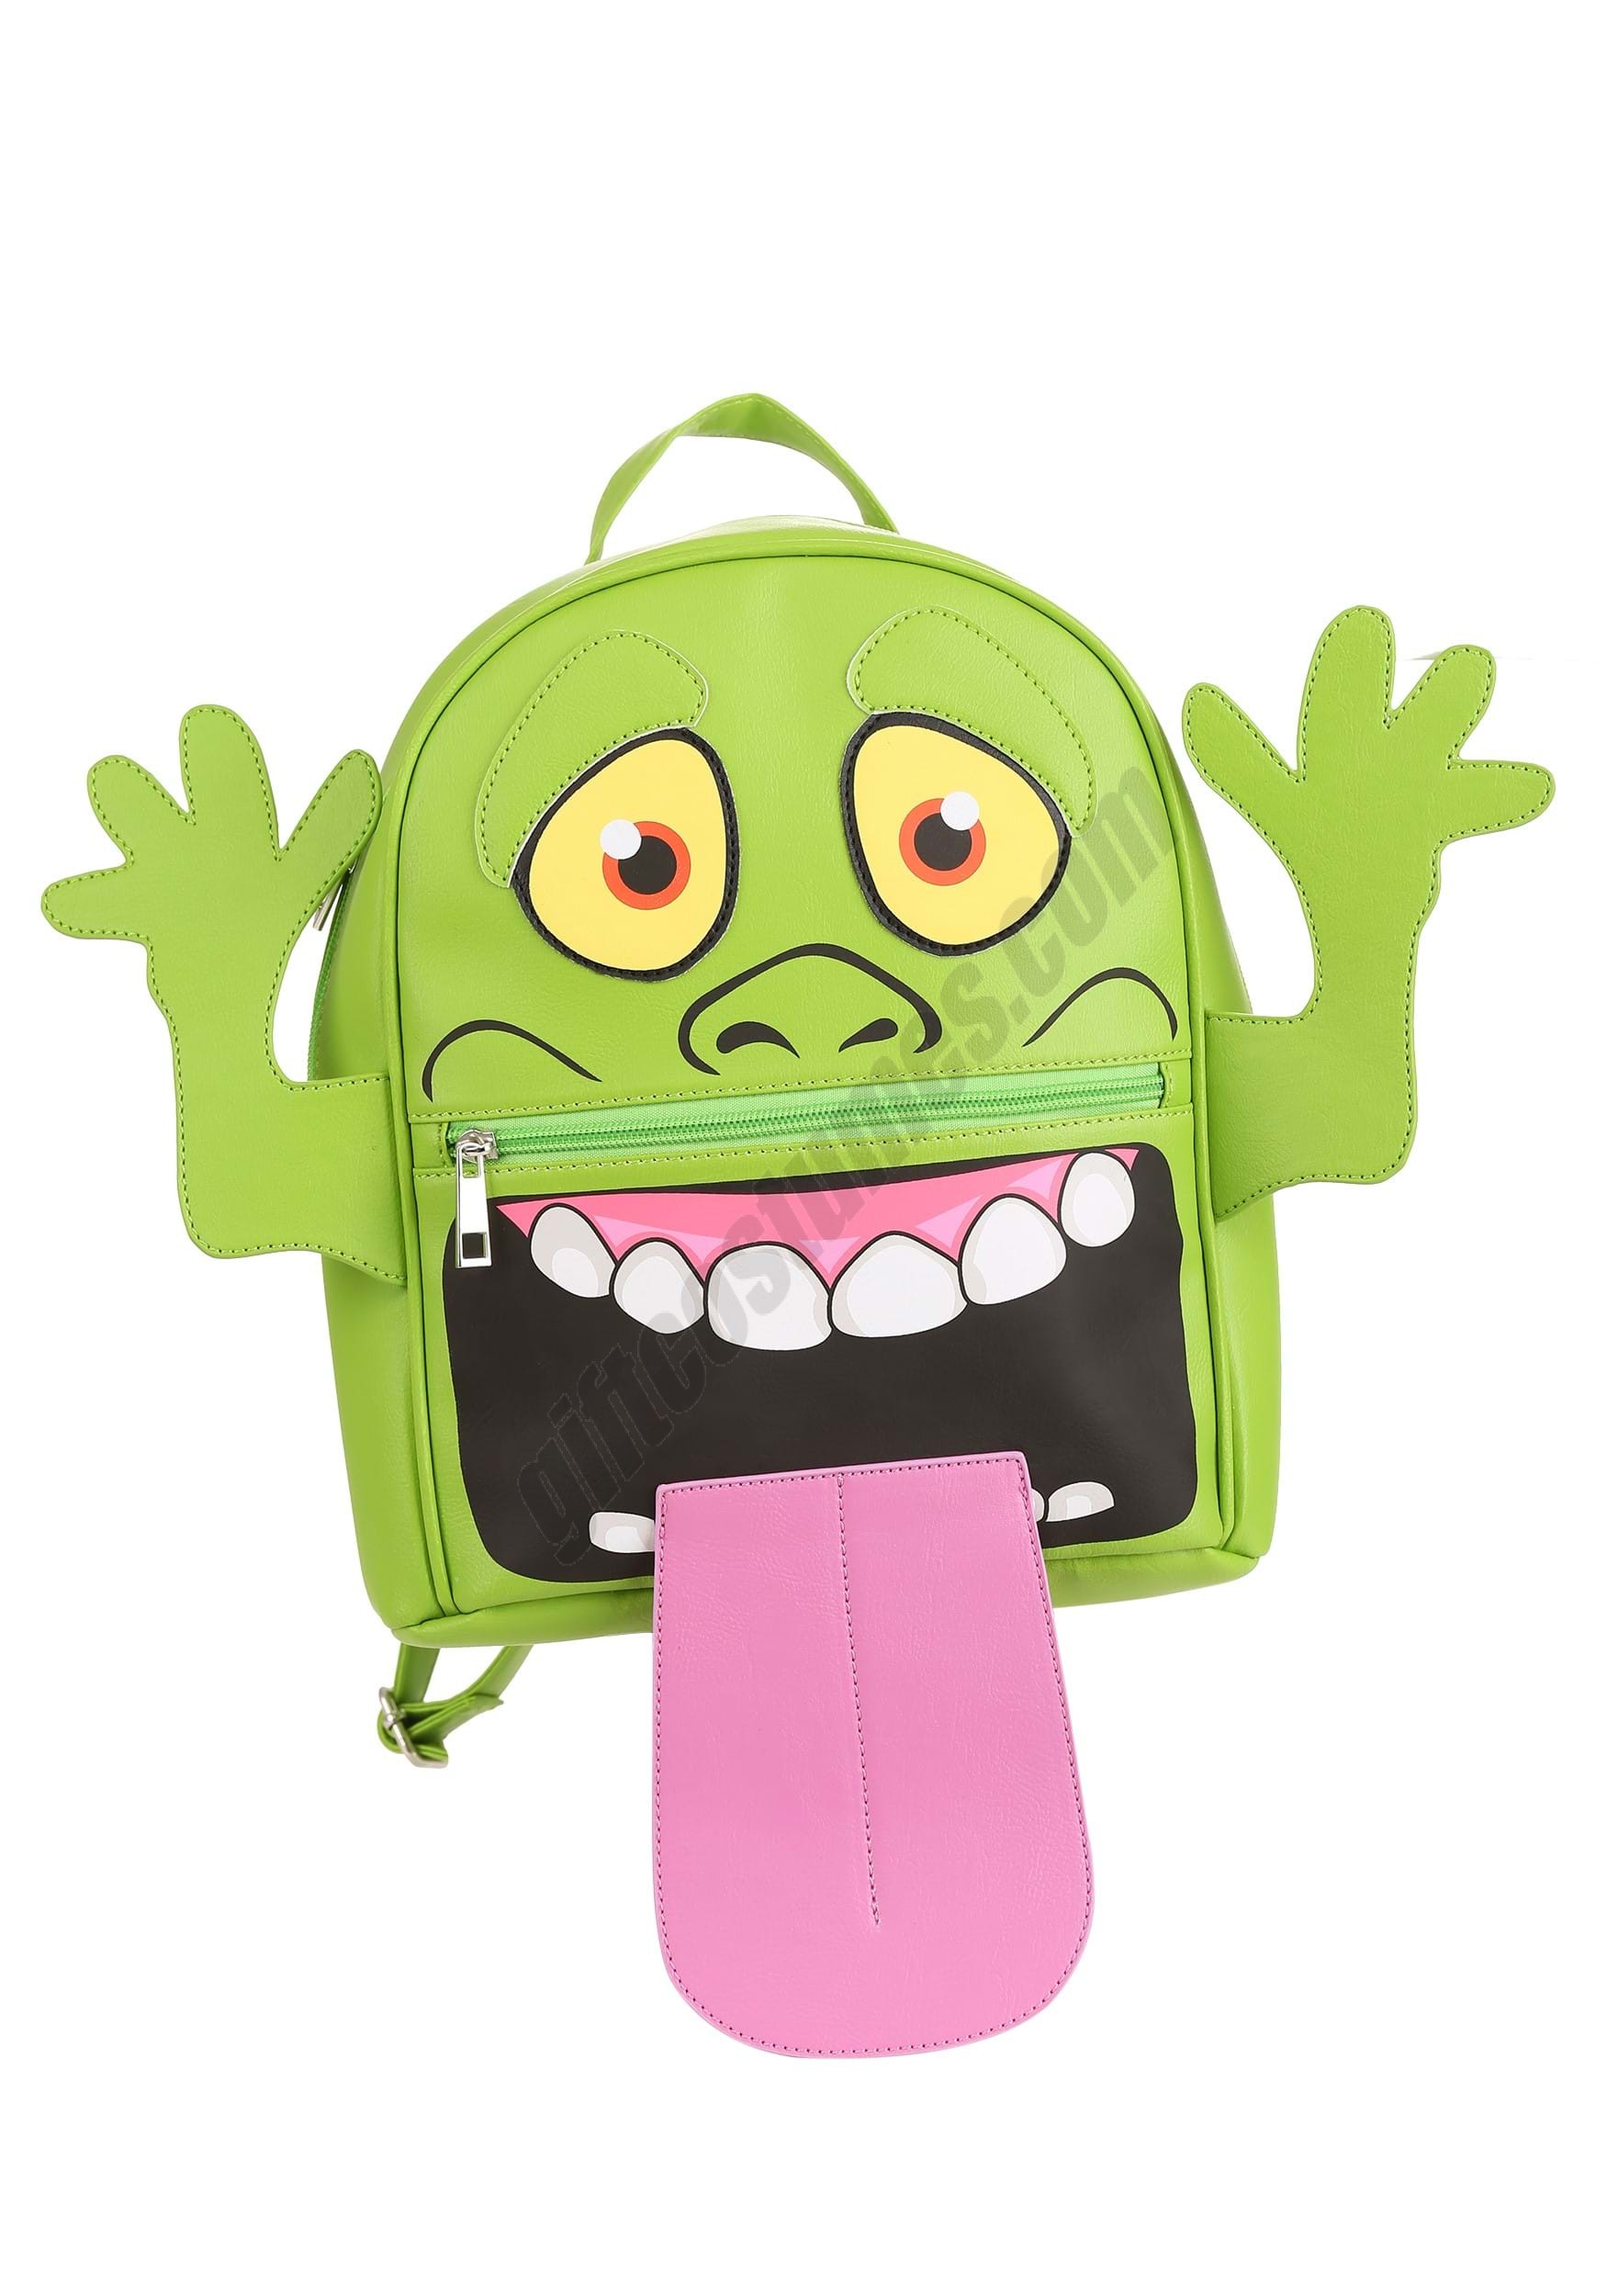 Ghostbusters Slimer Trick-or-Treat Tote Promotions - Ghostbusters Slimer Trick-or-Treat Tote Promotions